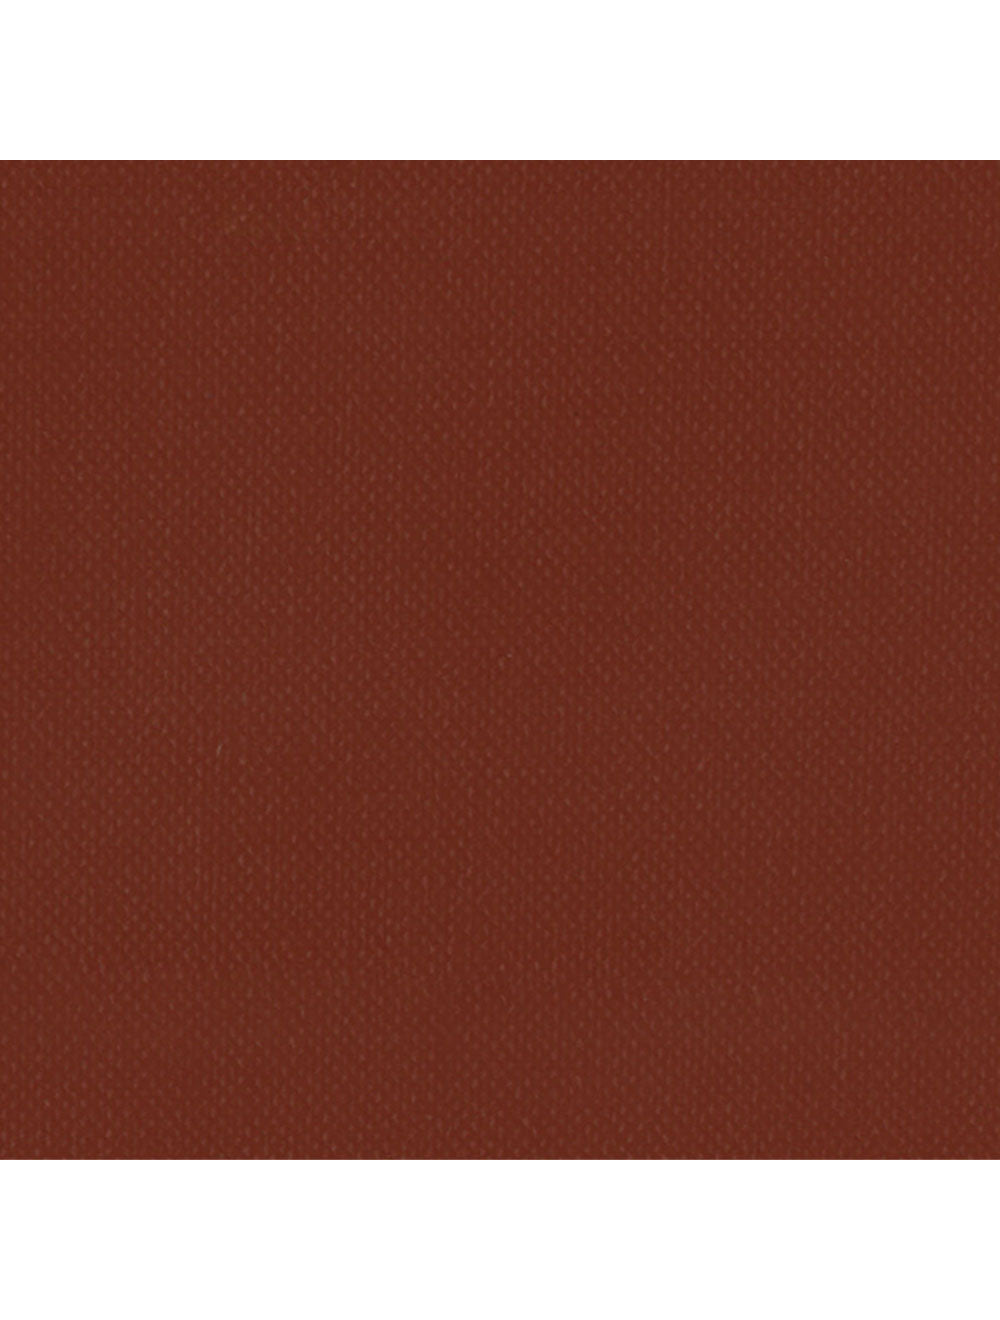 London Rust Material Swatch